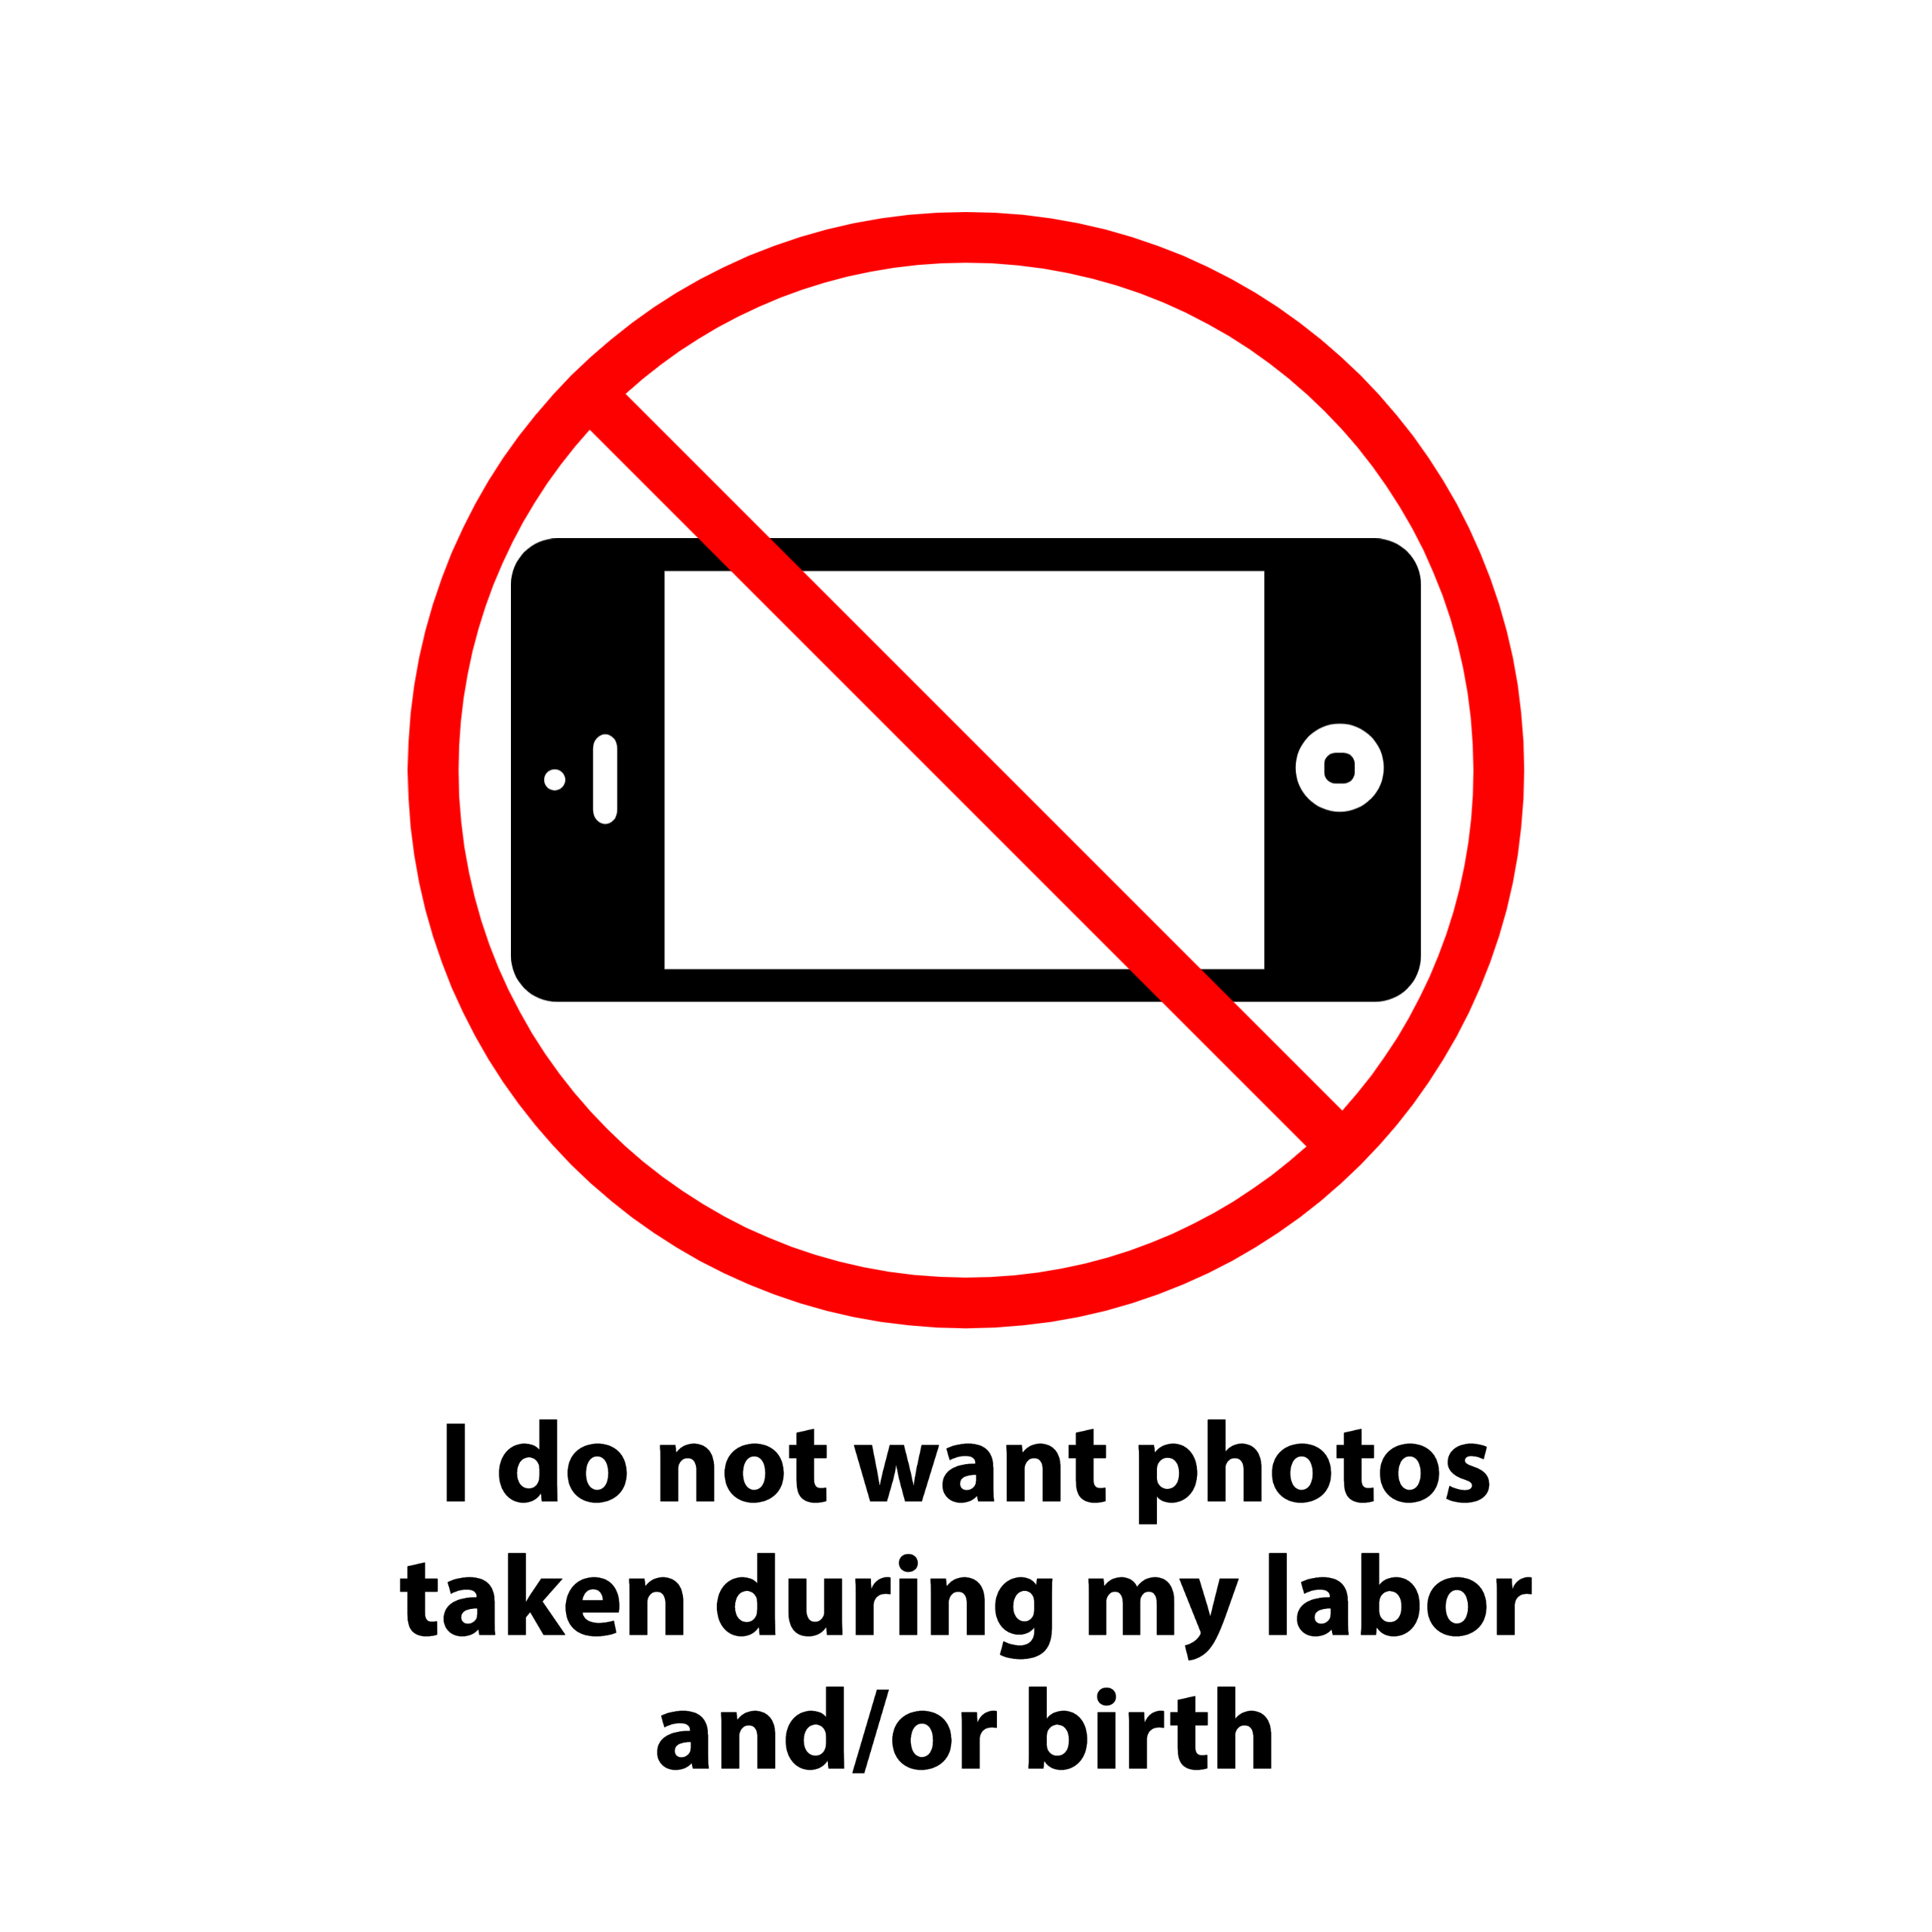 I do not want photos taken during my labor and/or birth (red)